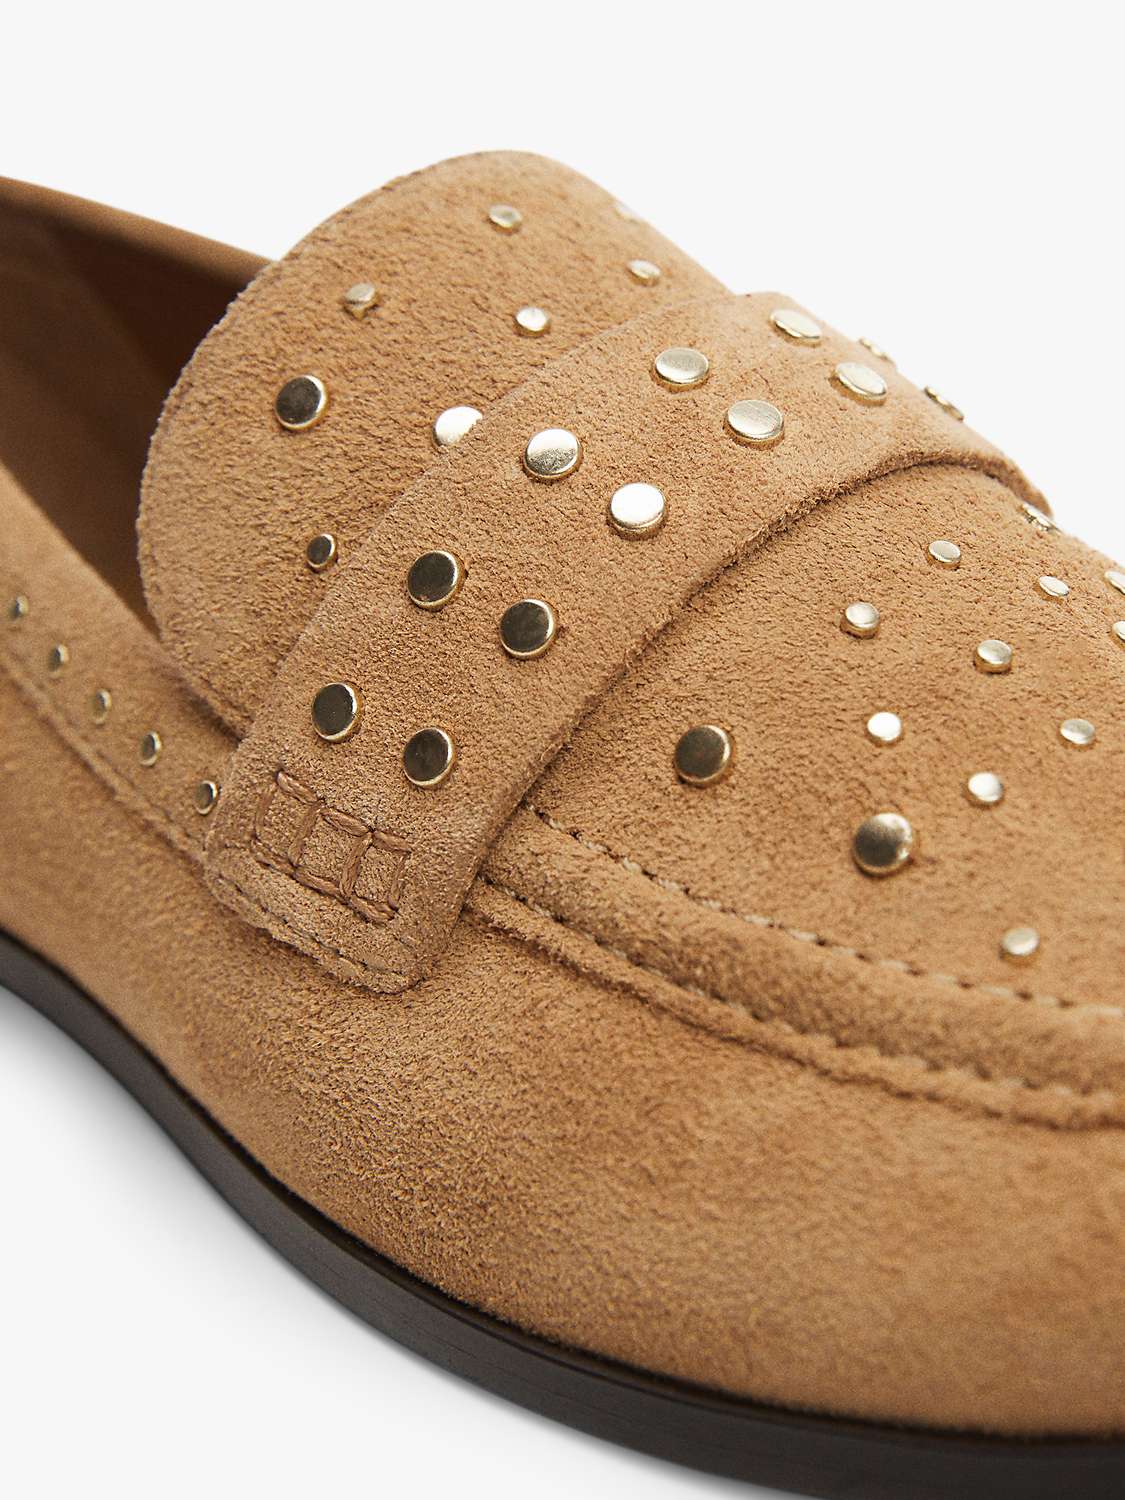 Buy Mango Curro Studded Suede Loafers, Brown Online at johnlewis.com